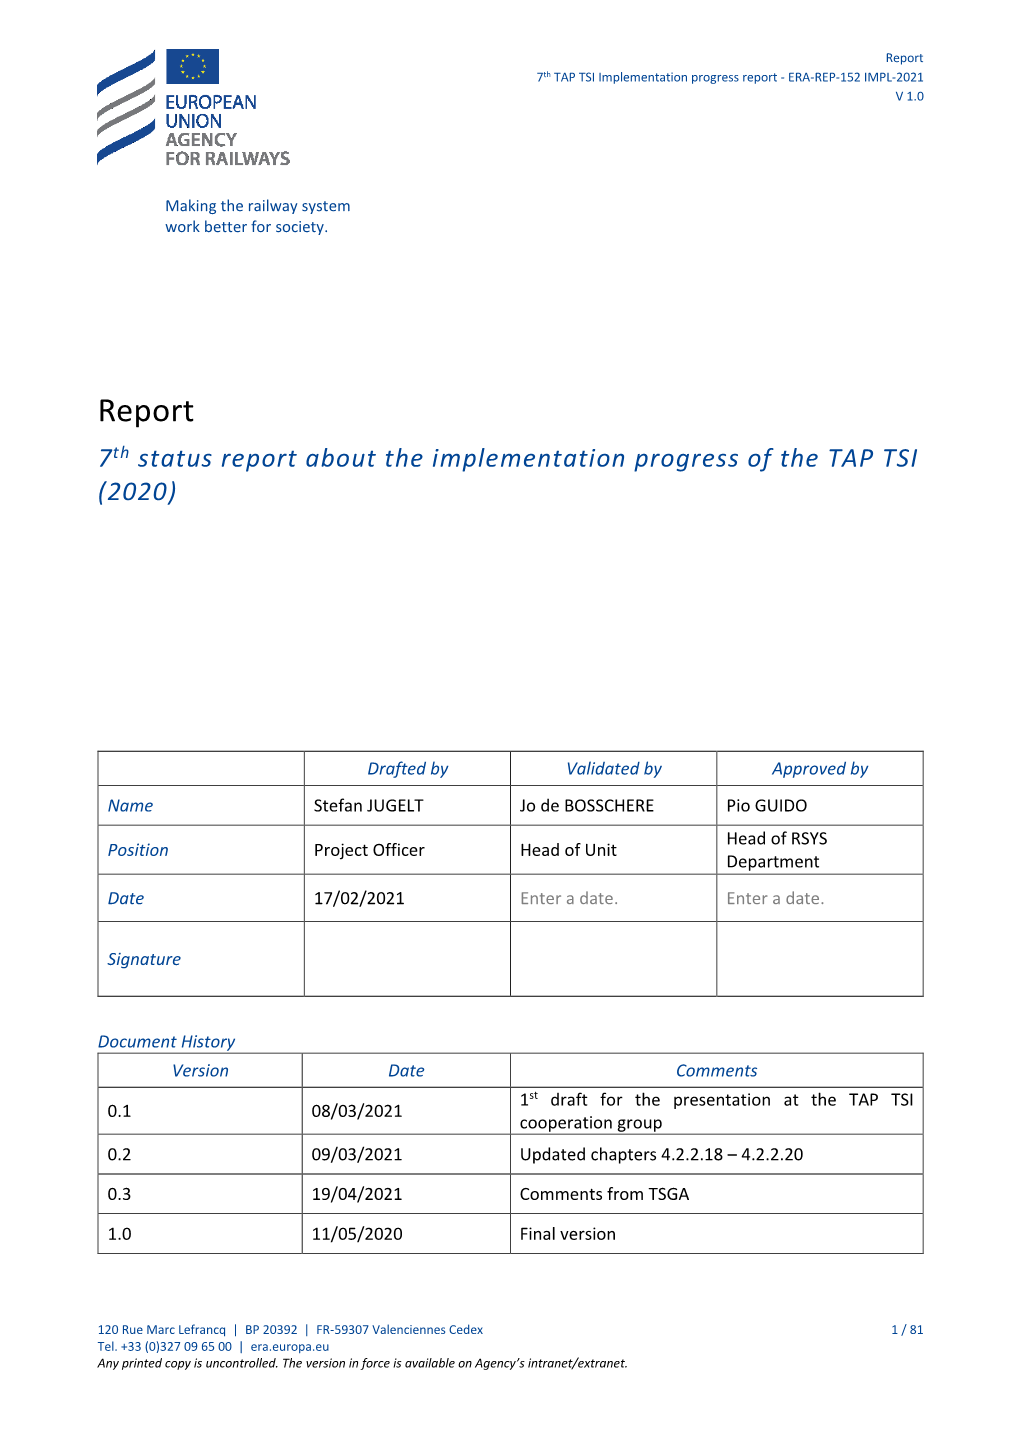 7Th Status Report About the Implementation Progress of the TAP TSI (2020)